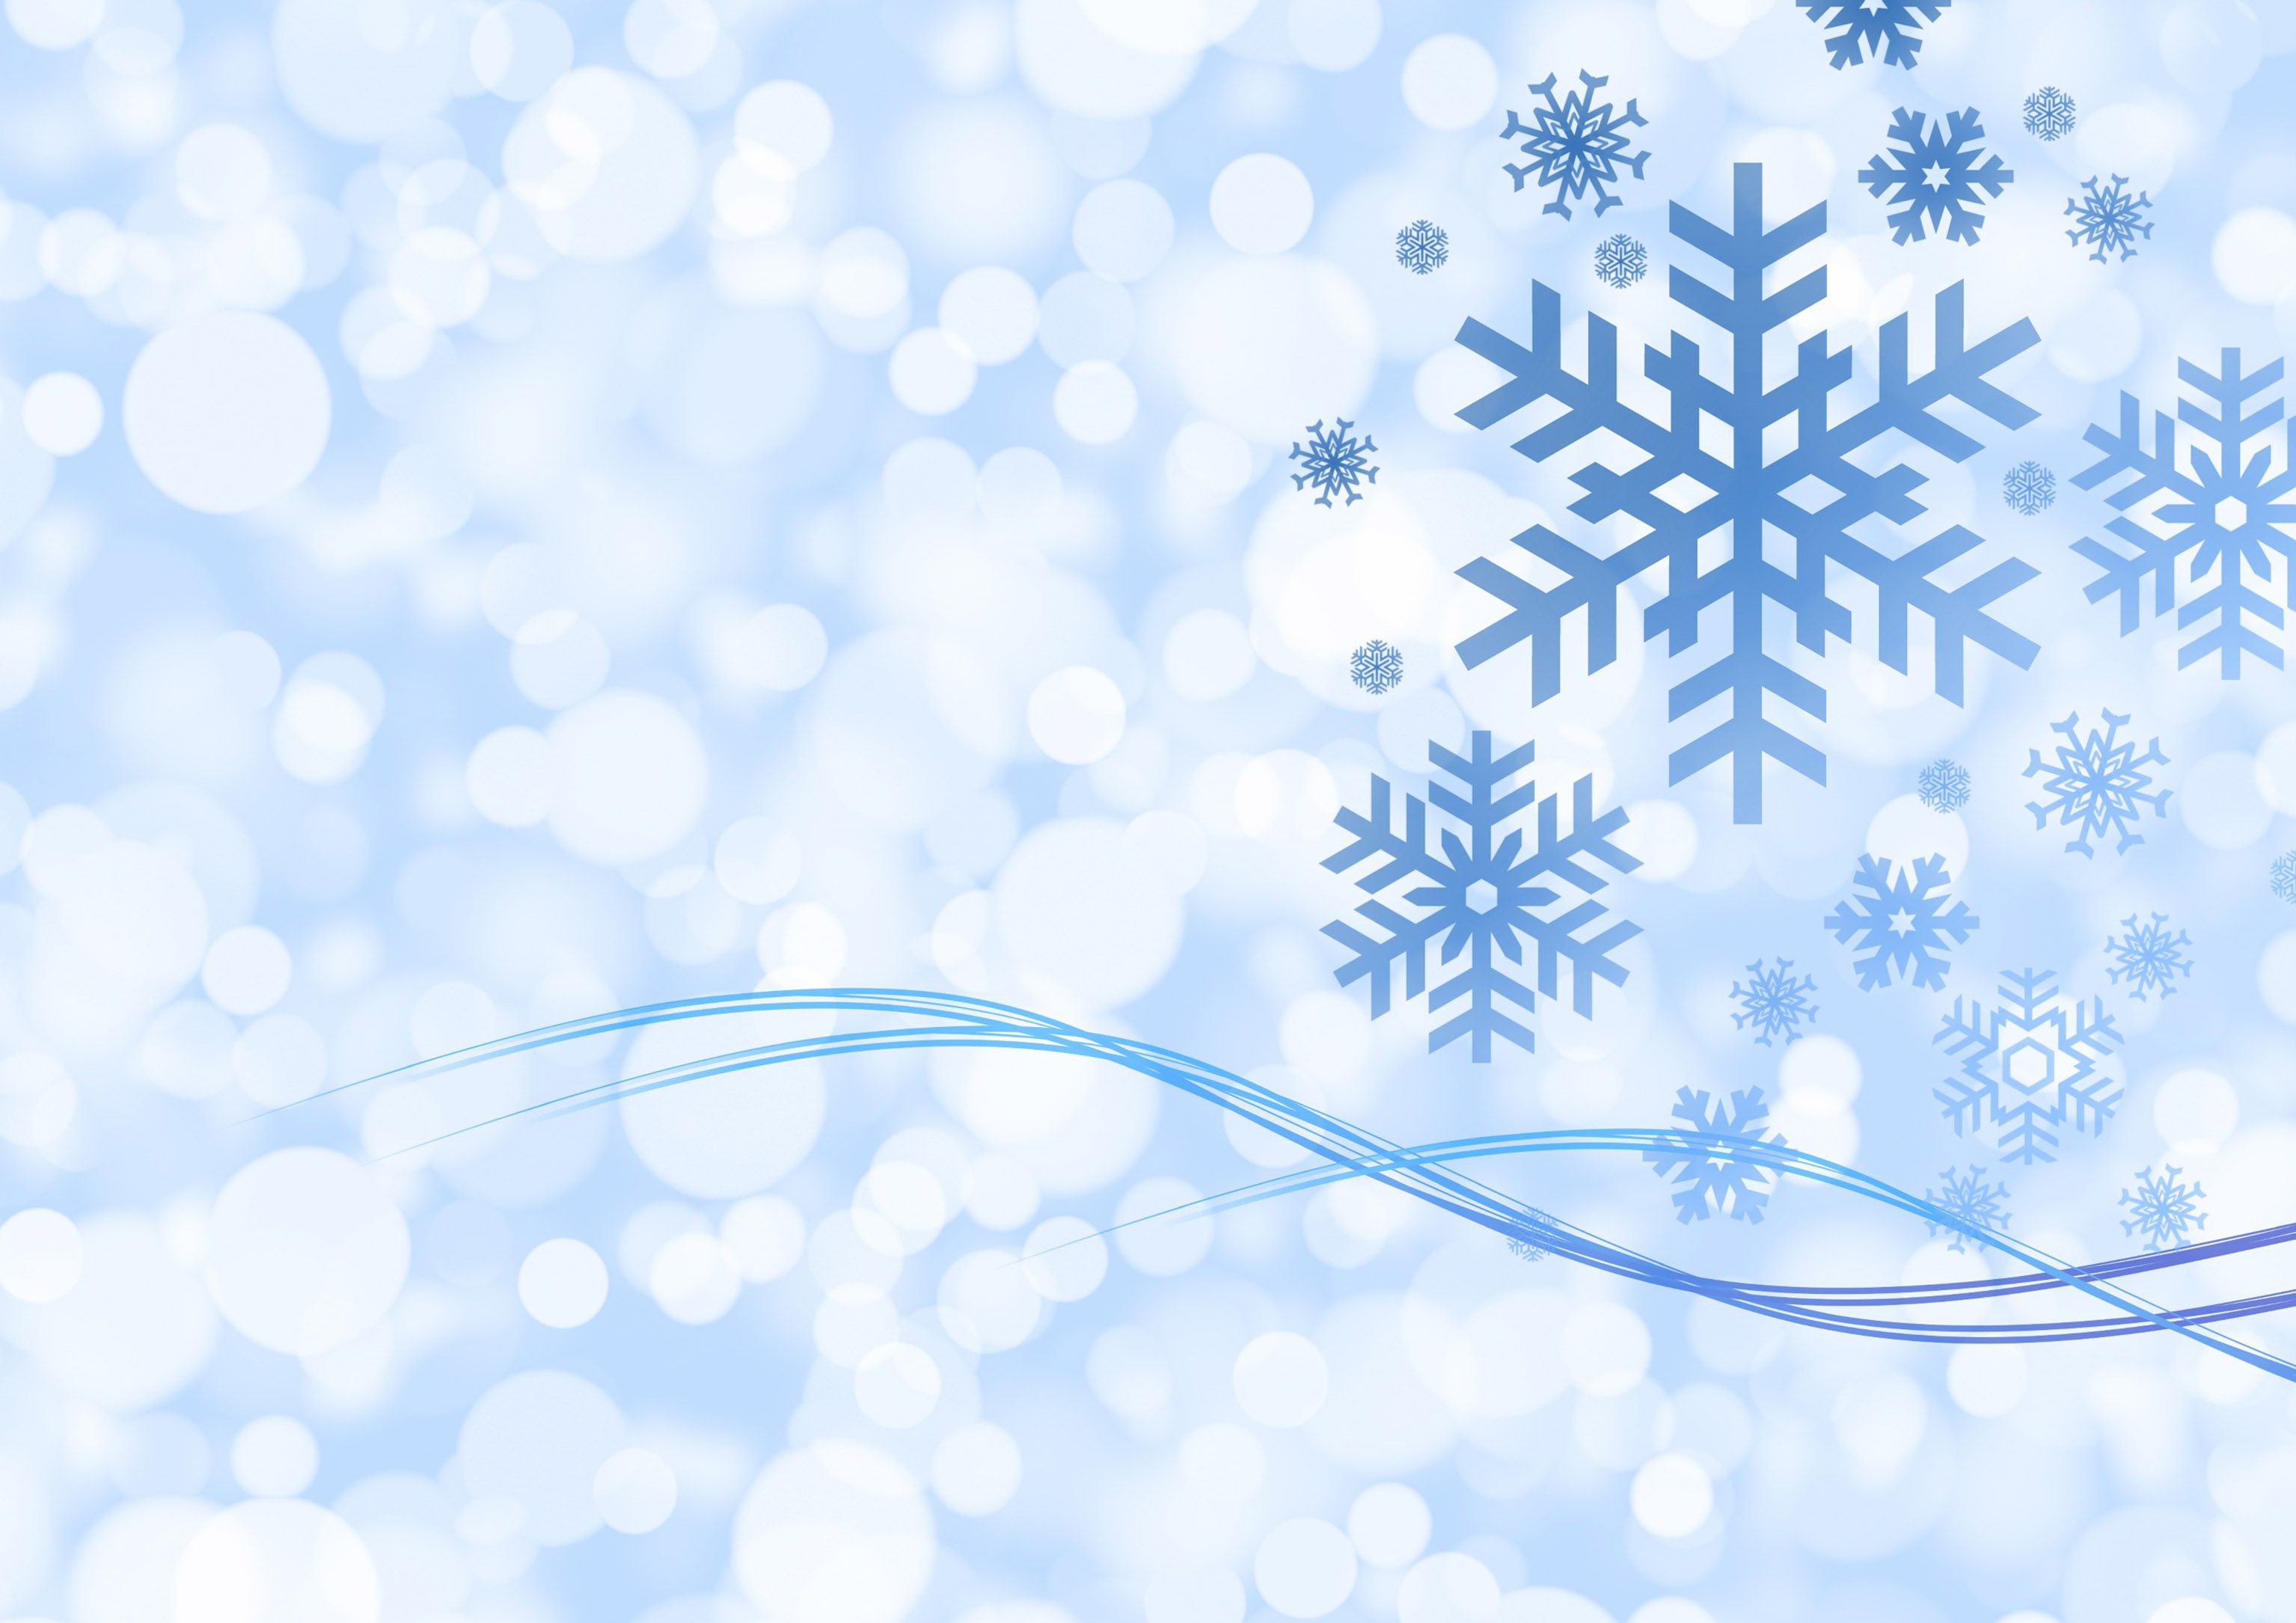 light blue snow christmas wallpaper. Free Textures, Photo & Background Image